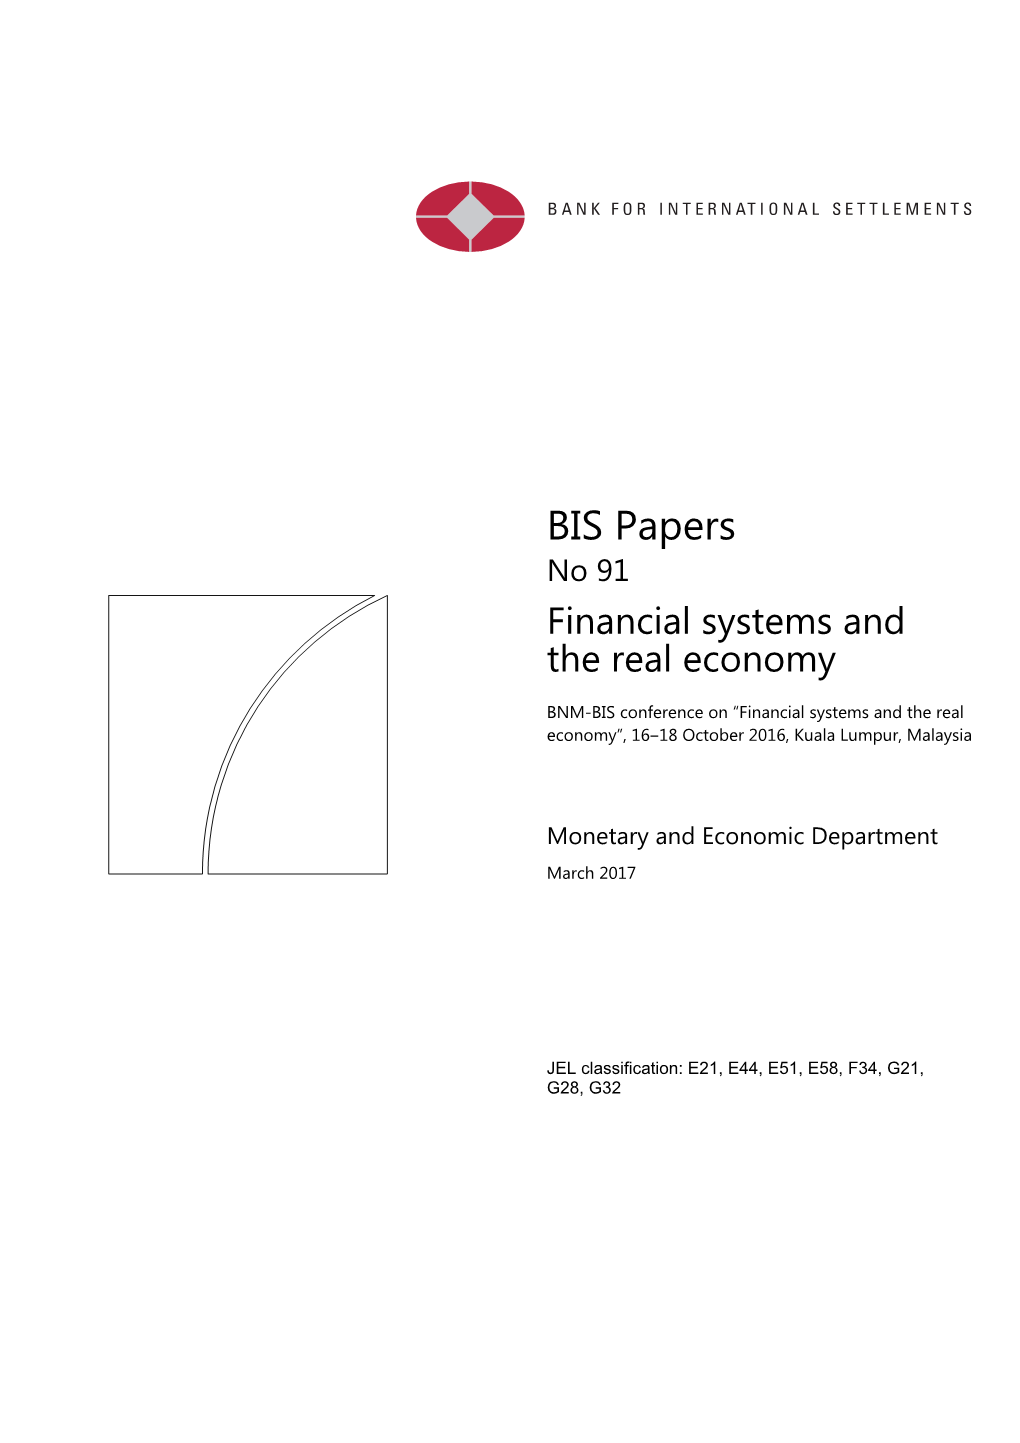 BIS Papers No 91 Financial Systems and the Real Economy